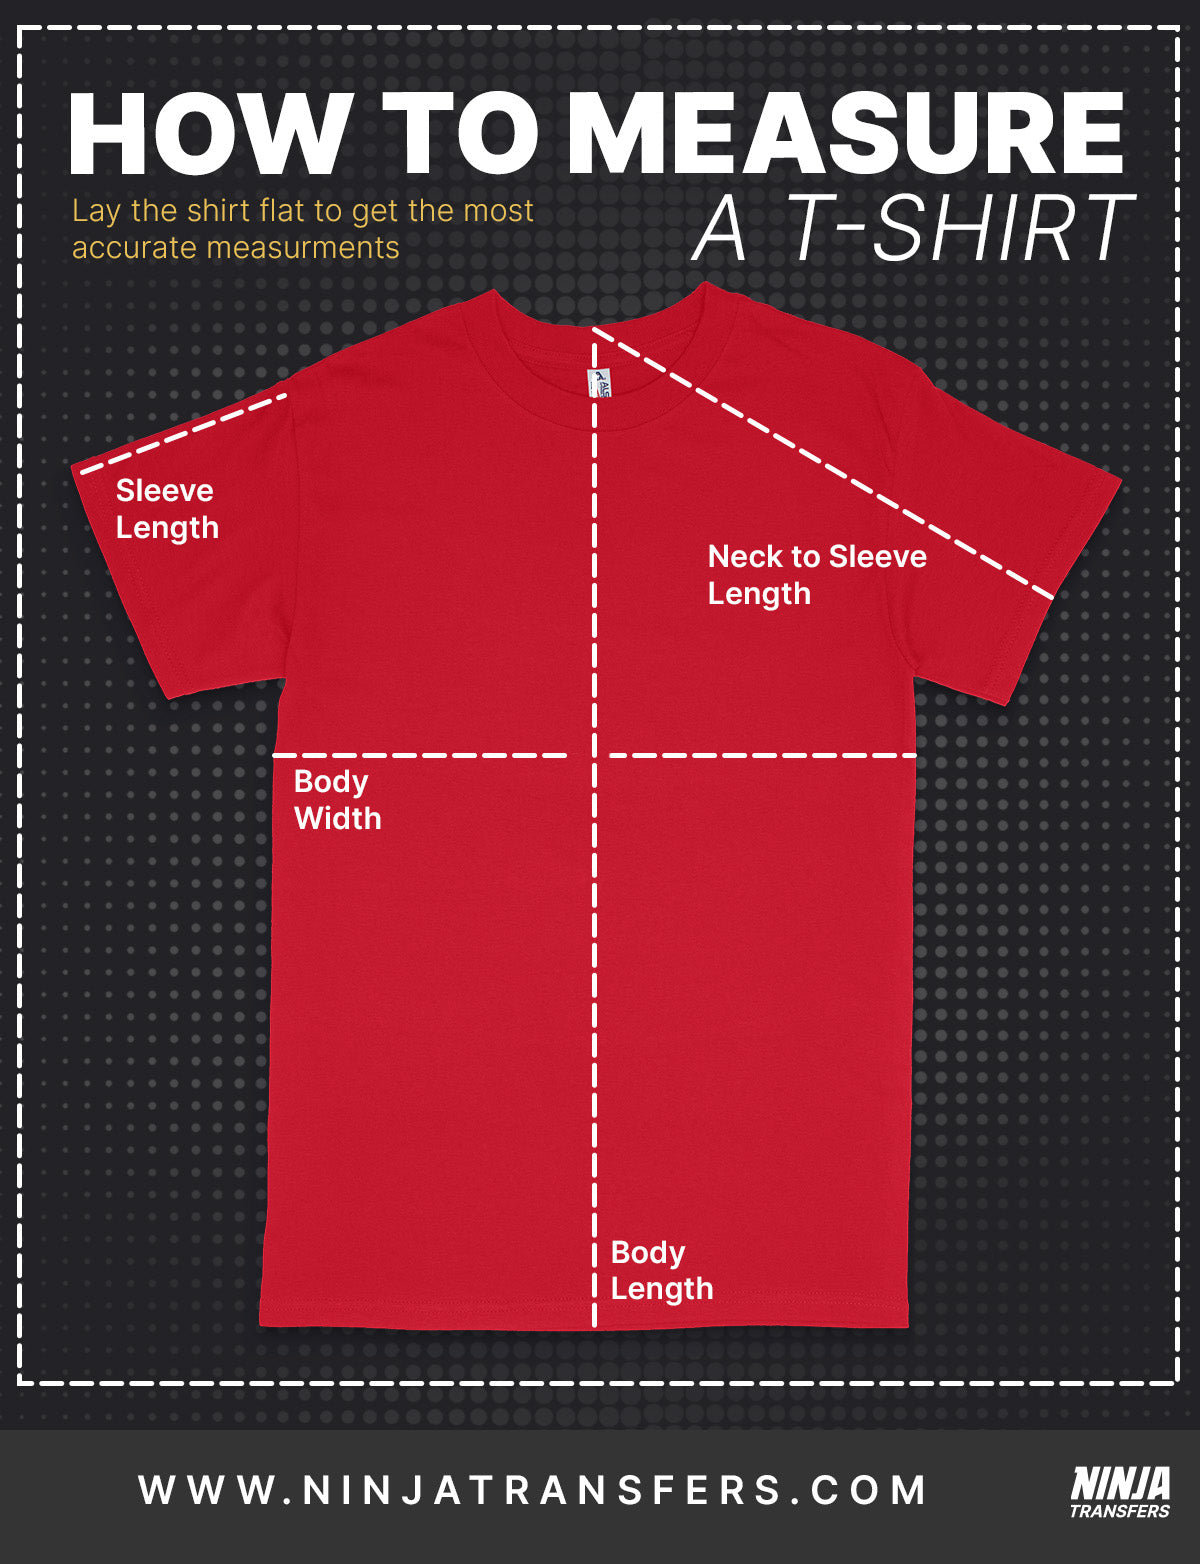 Diagram showing how to measure a unisex shirt.